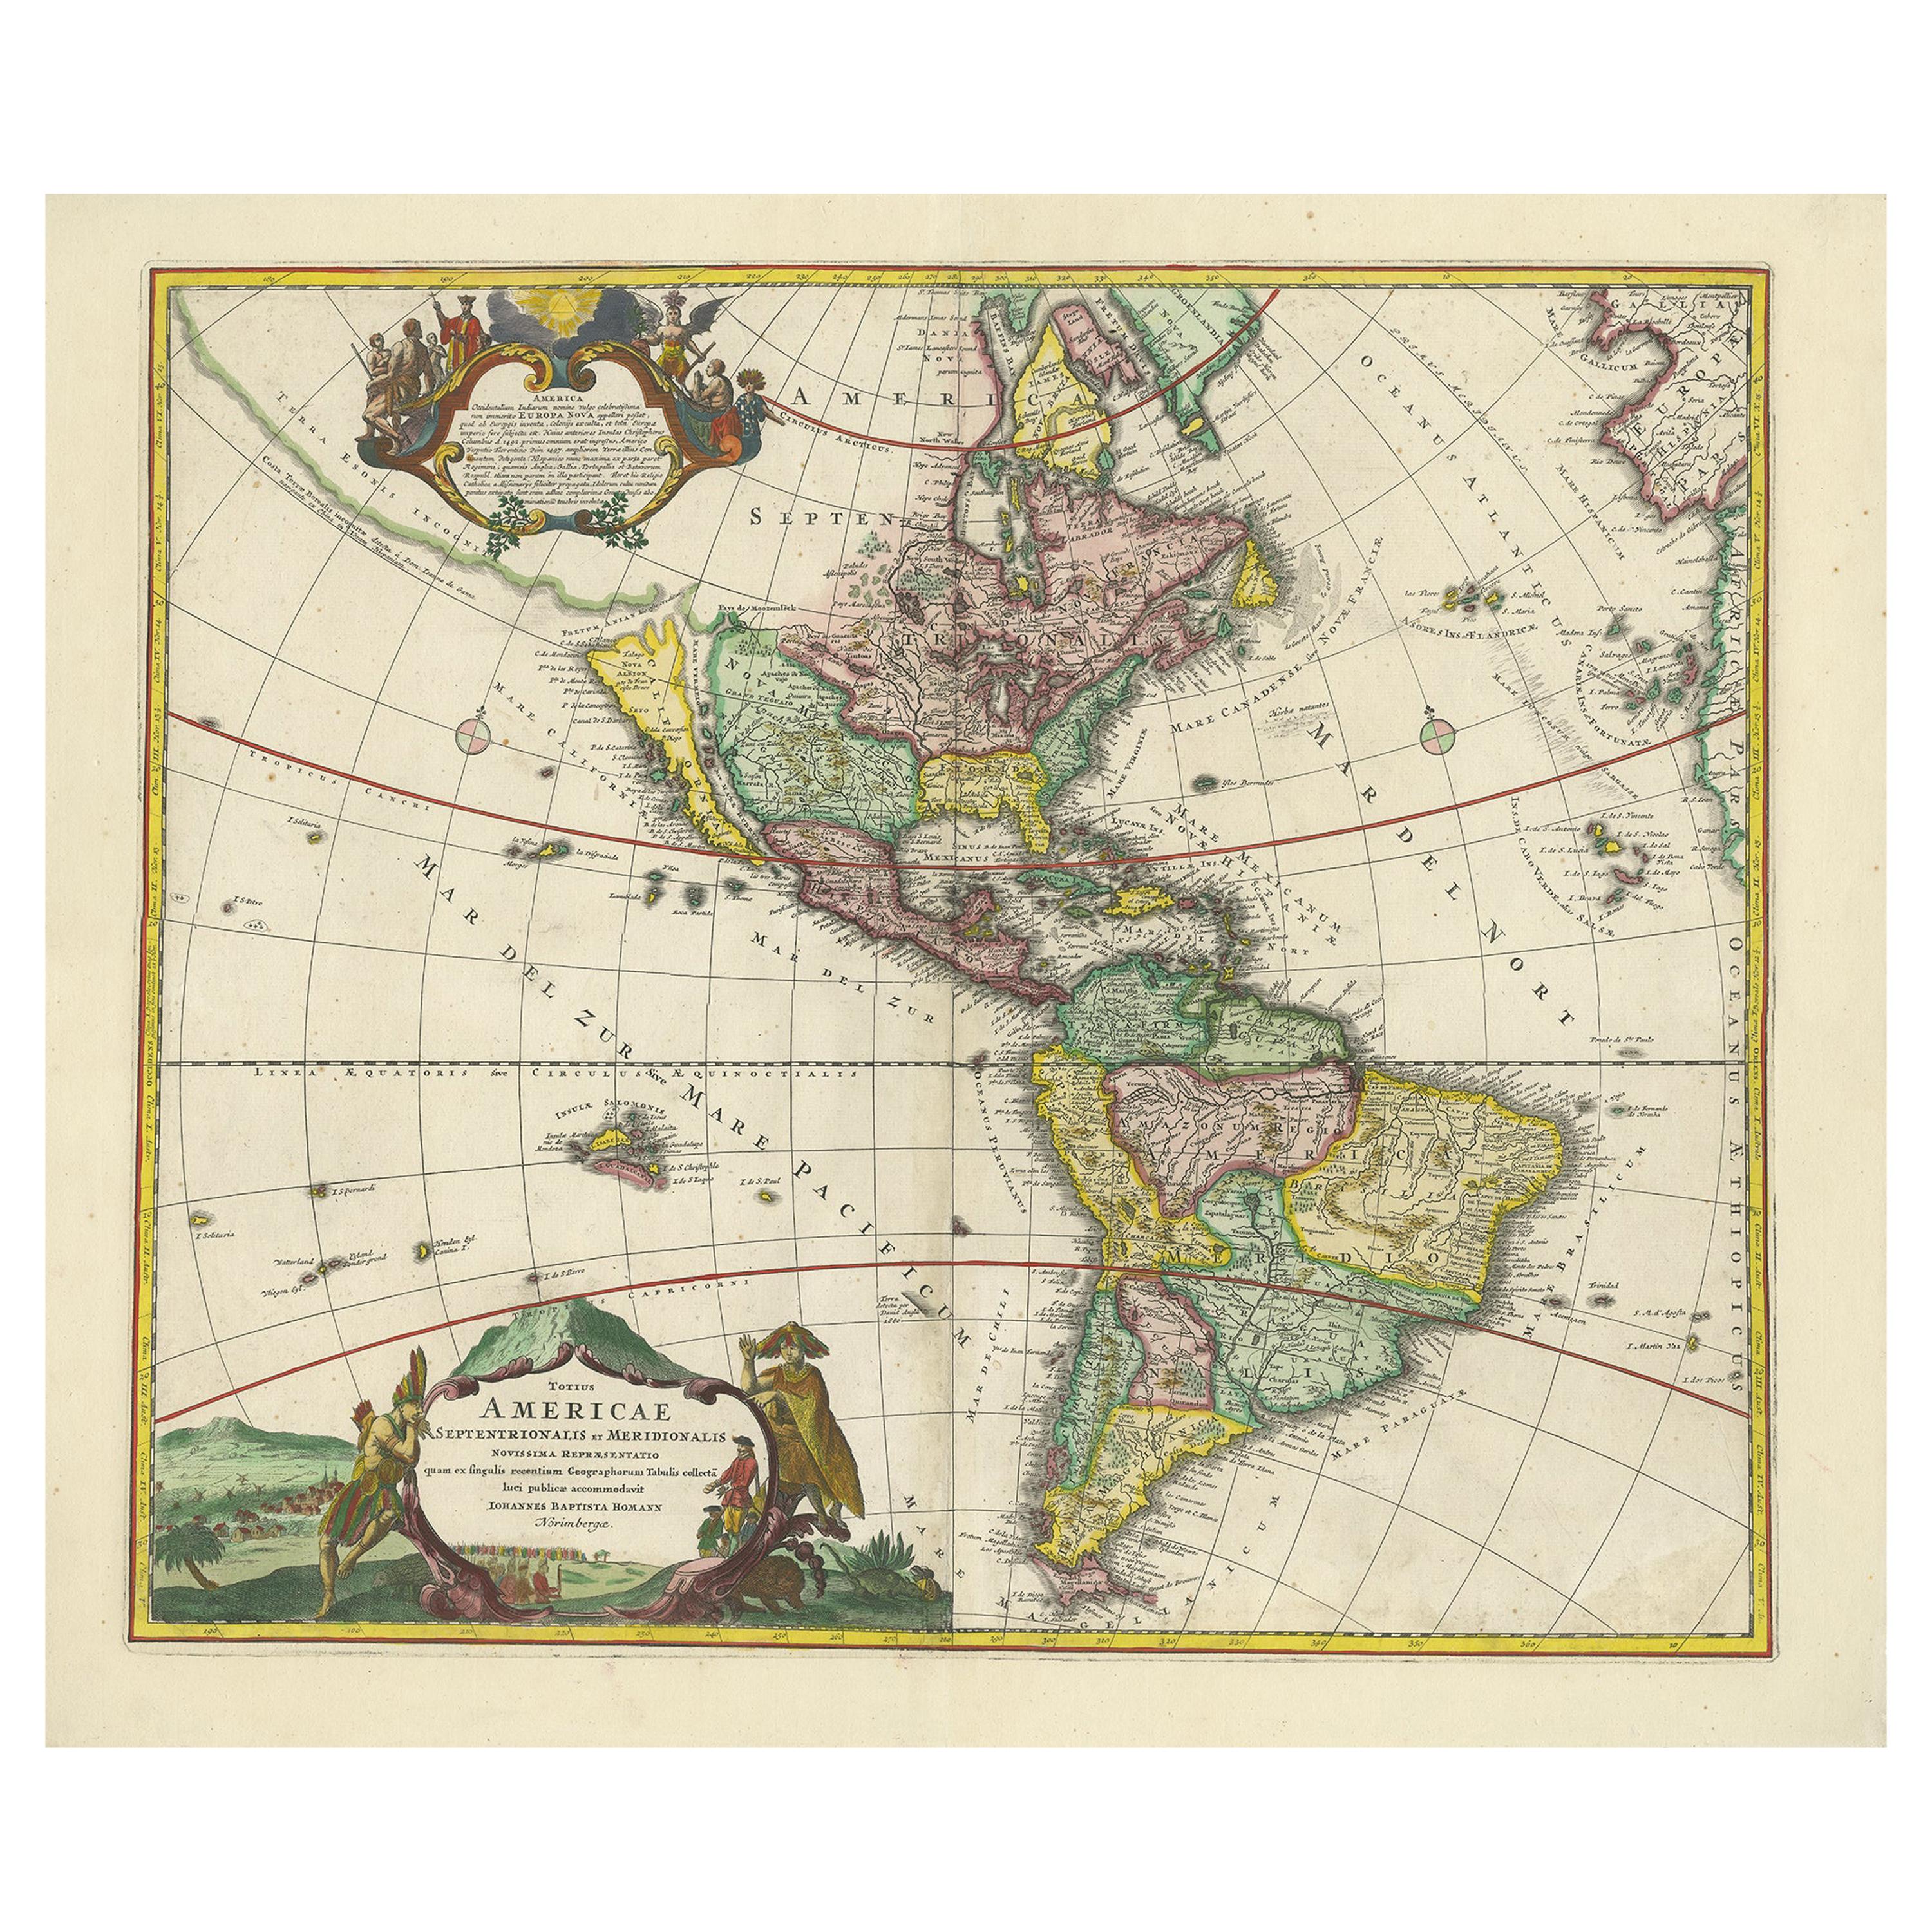 Antique Map of America with California as an Island by Homann '1710'